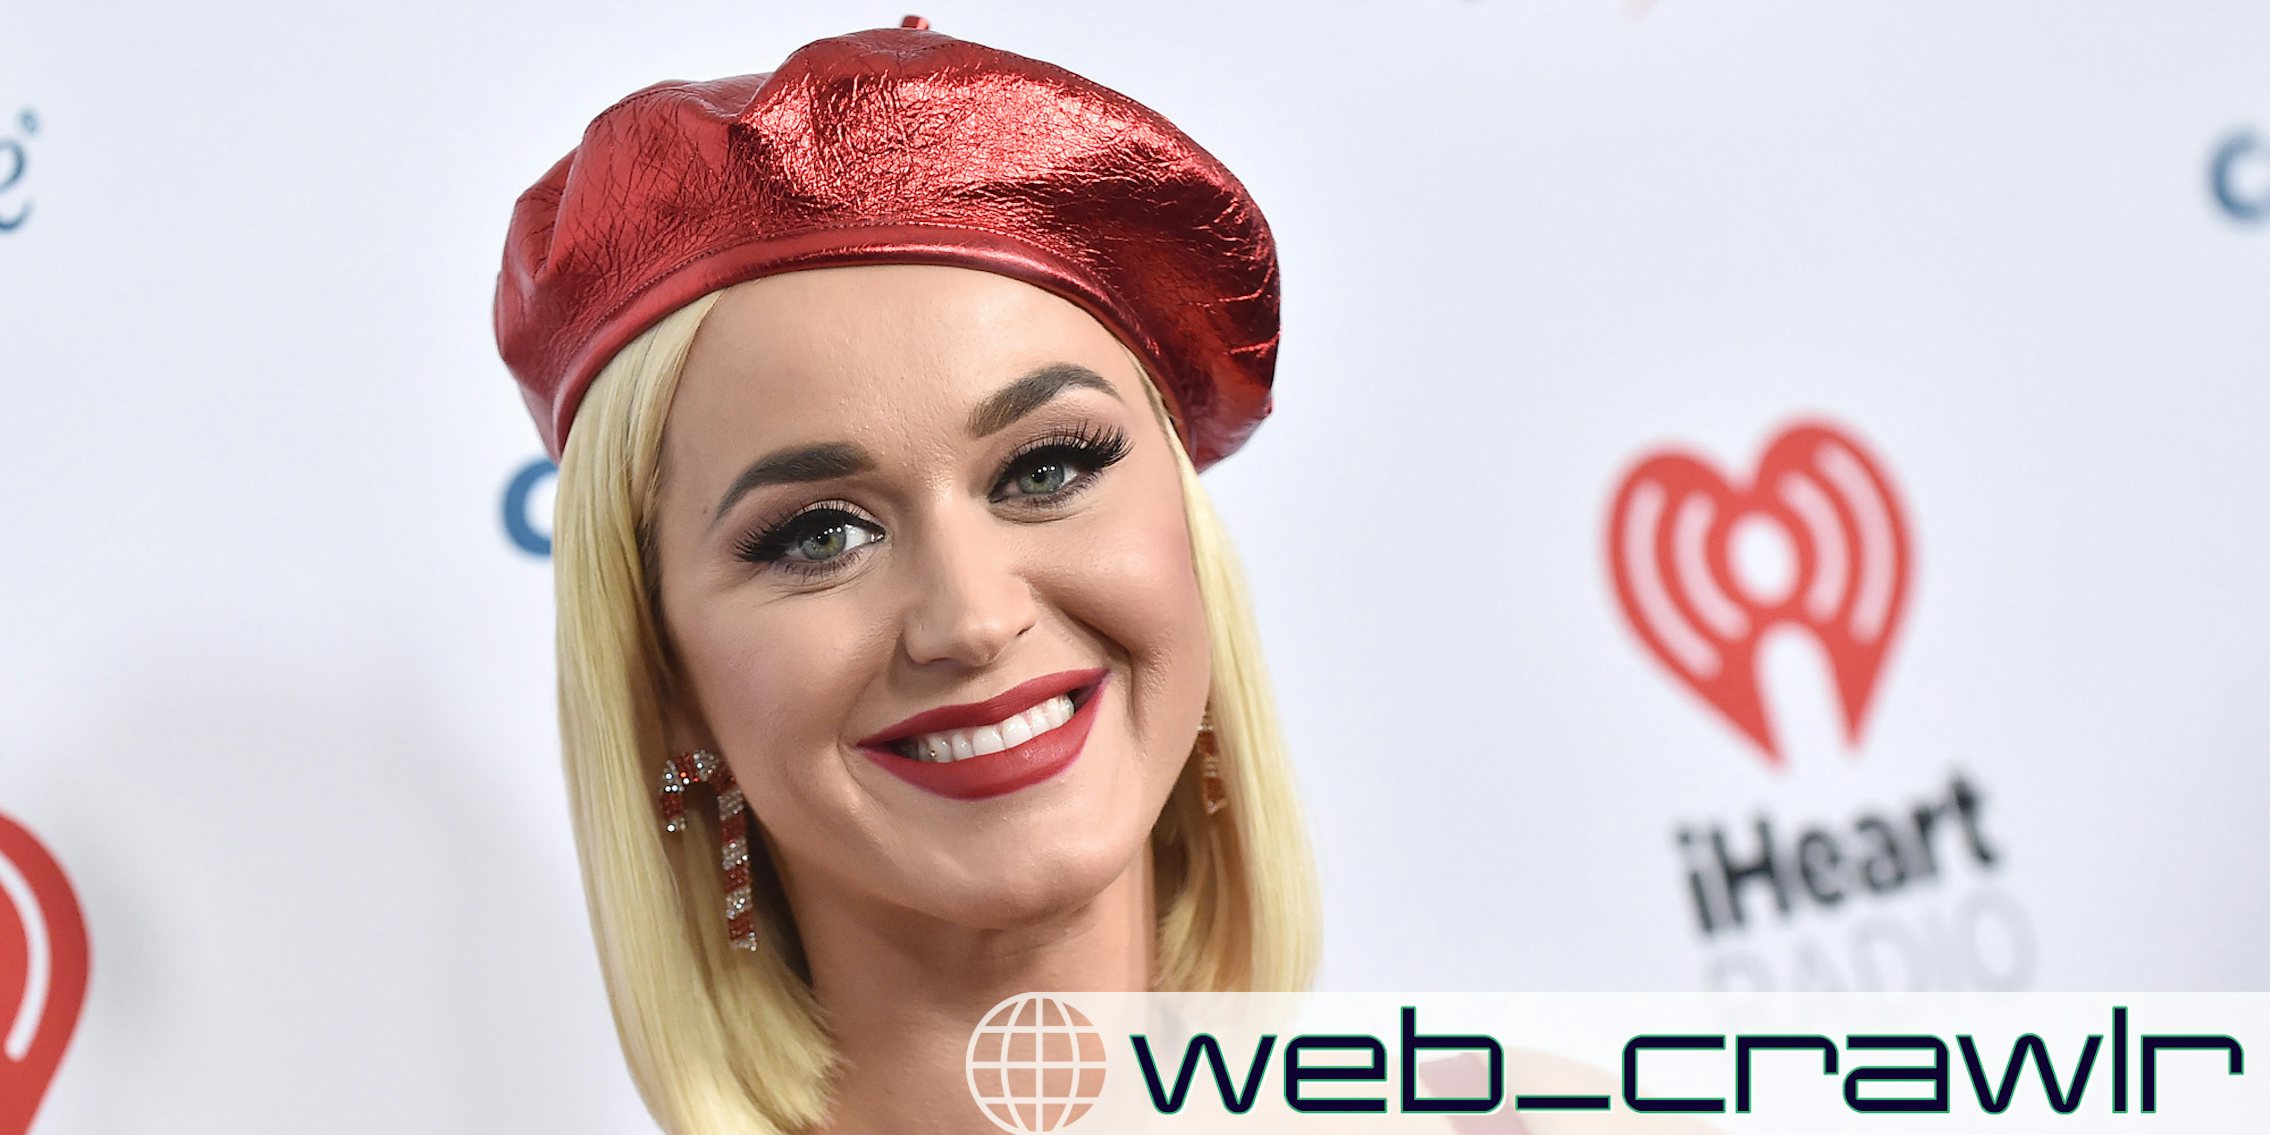 Katy Perry in 2019. The Daily Dot newsletter web_crawlr logo is in the bottom right corner.